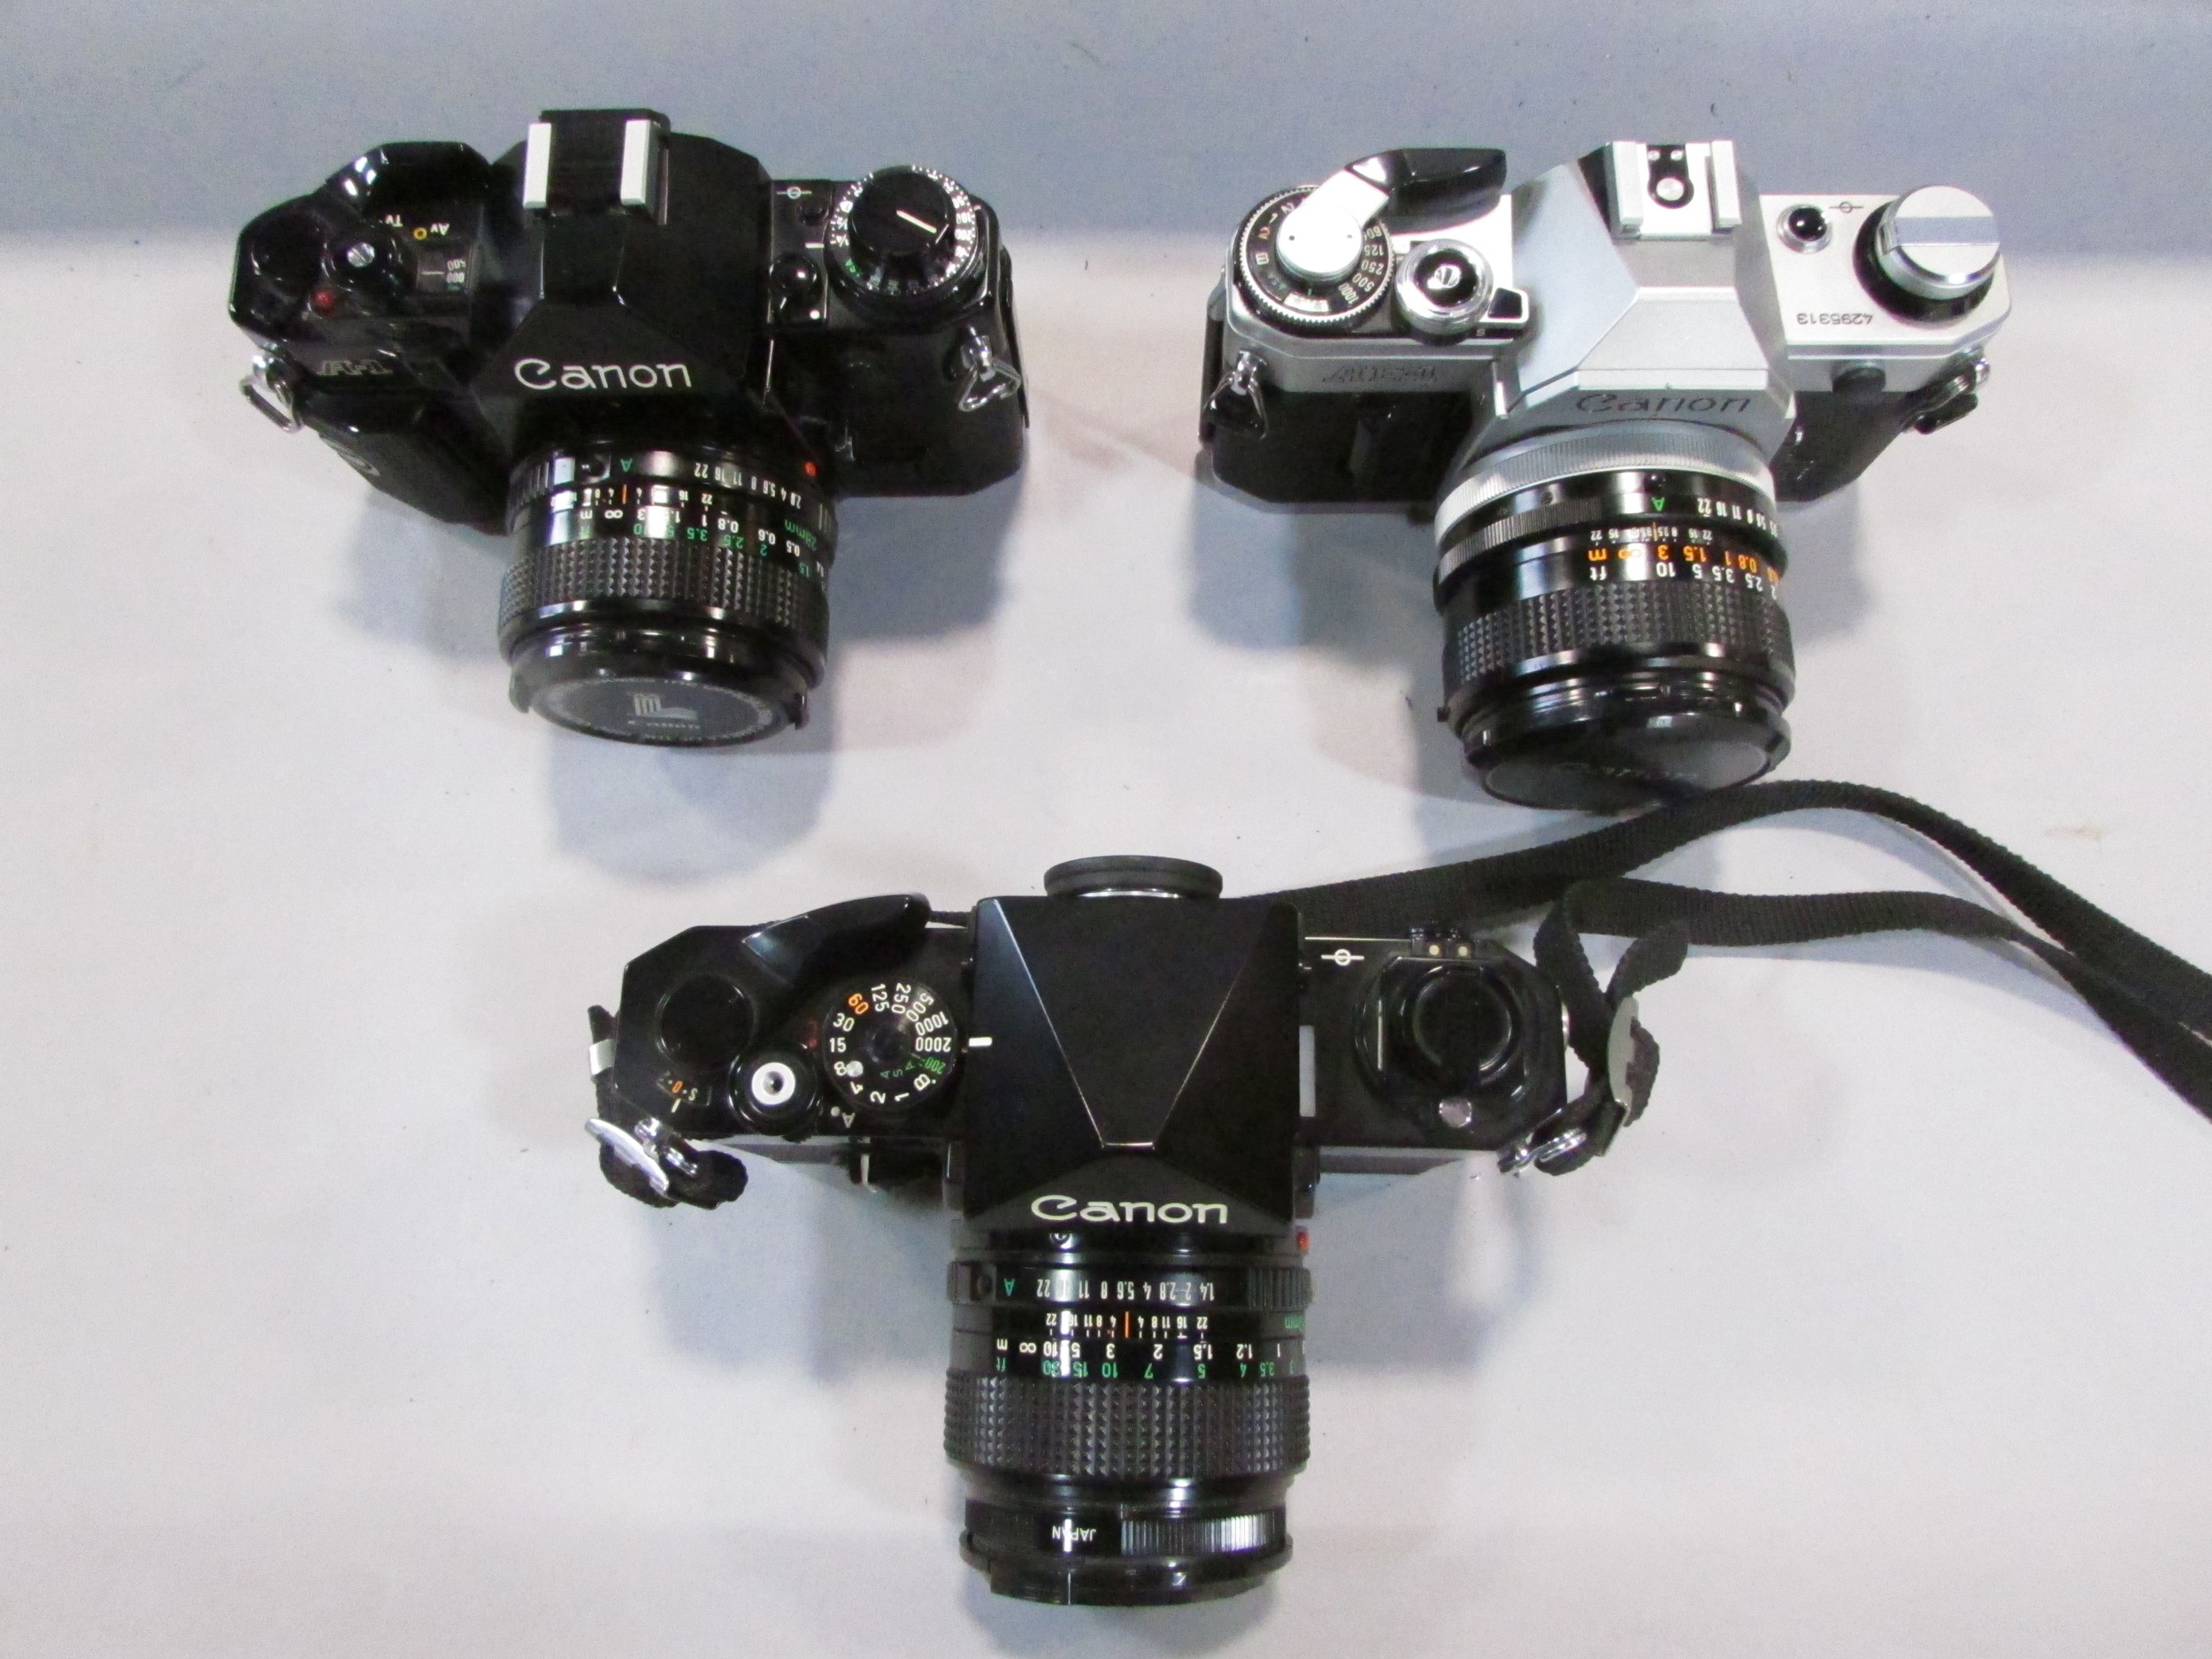 Three Canon cameras: models A1, AE1, F1, together with a 135 millimetre lens, 20 mm lens, all - Image 4 of 5